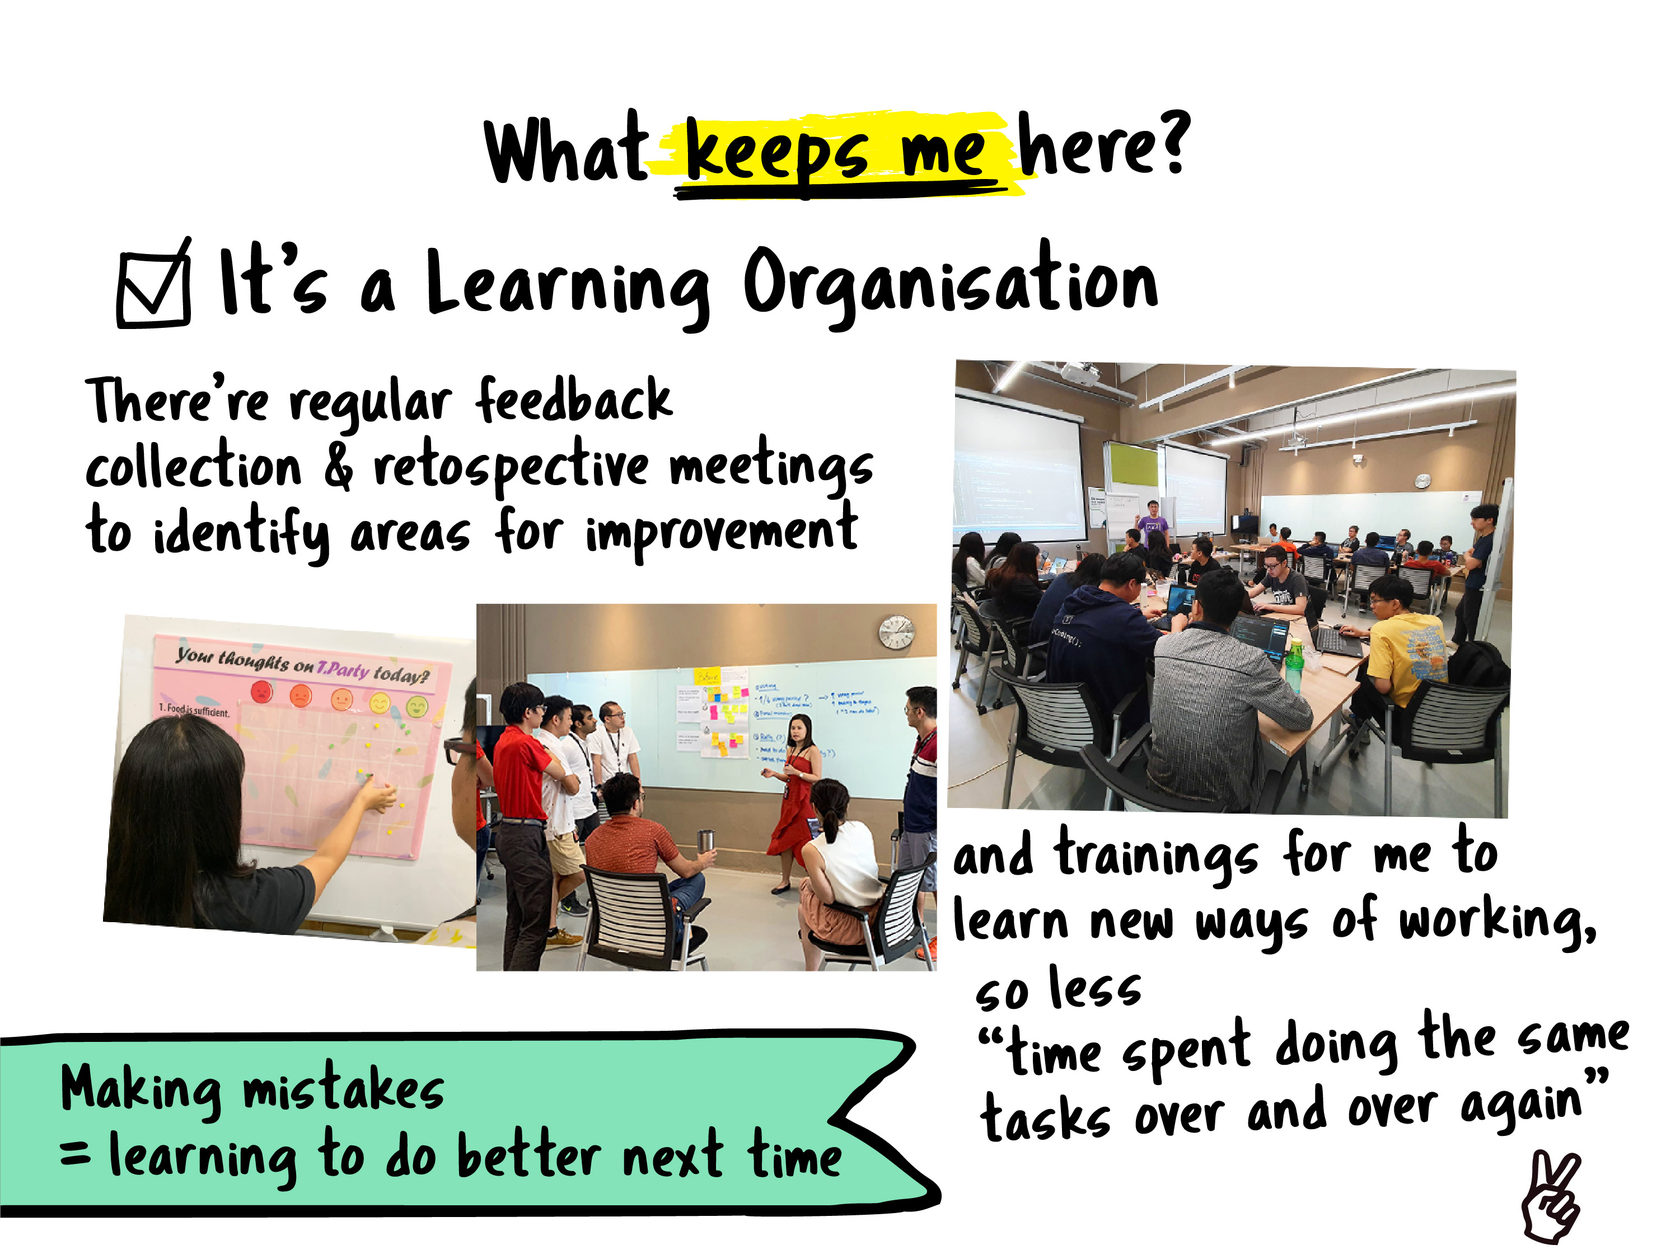 #1 #NeverStopImproving There’s regular feedback collection, retrospective meetings to identify areas for improvement and plenty of on job and on site trainings for me to learn new ways of working, so no more time spent doing the same tasks over and over again. Also, maybe it is the Agile mindset at work, but making mistakes is part of learning to do better next time!